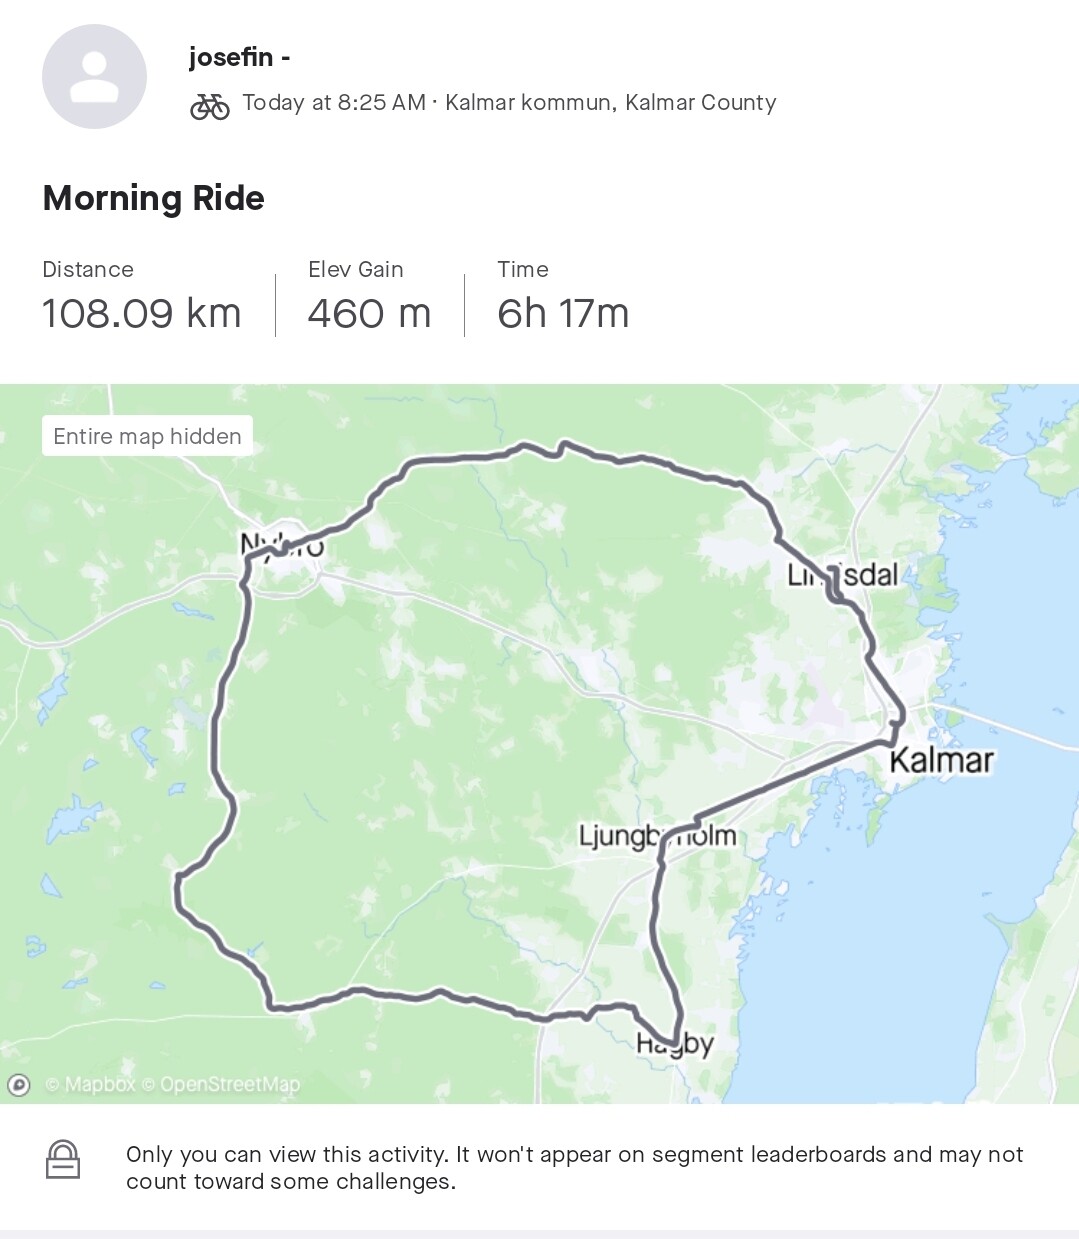 Strava map showing the route I took. It's pretty zoomed out but shows part of southeast sweden.